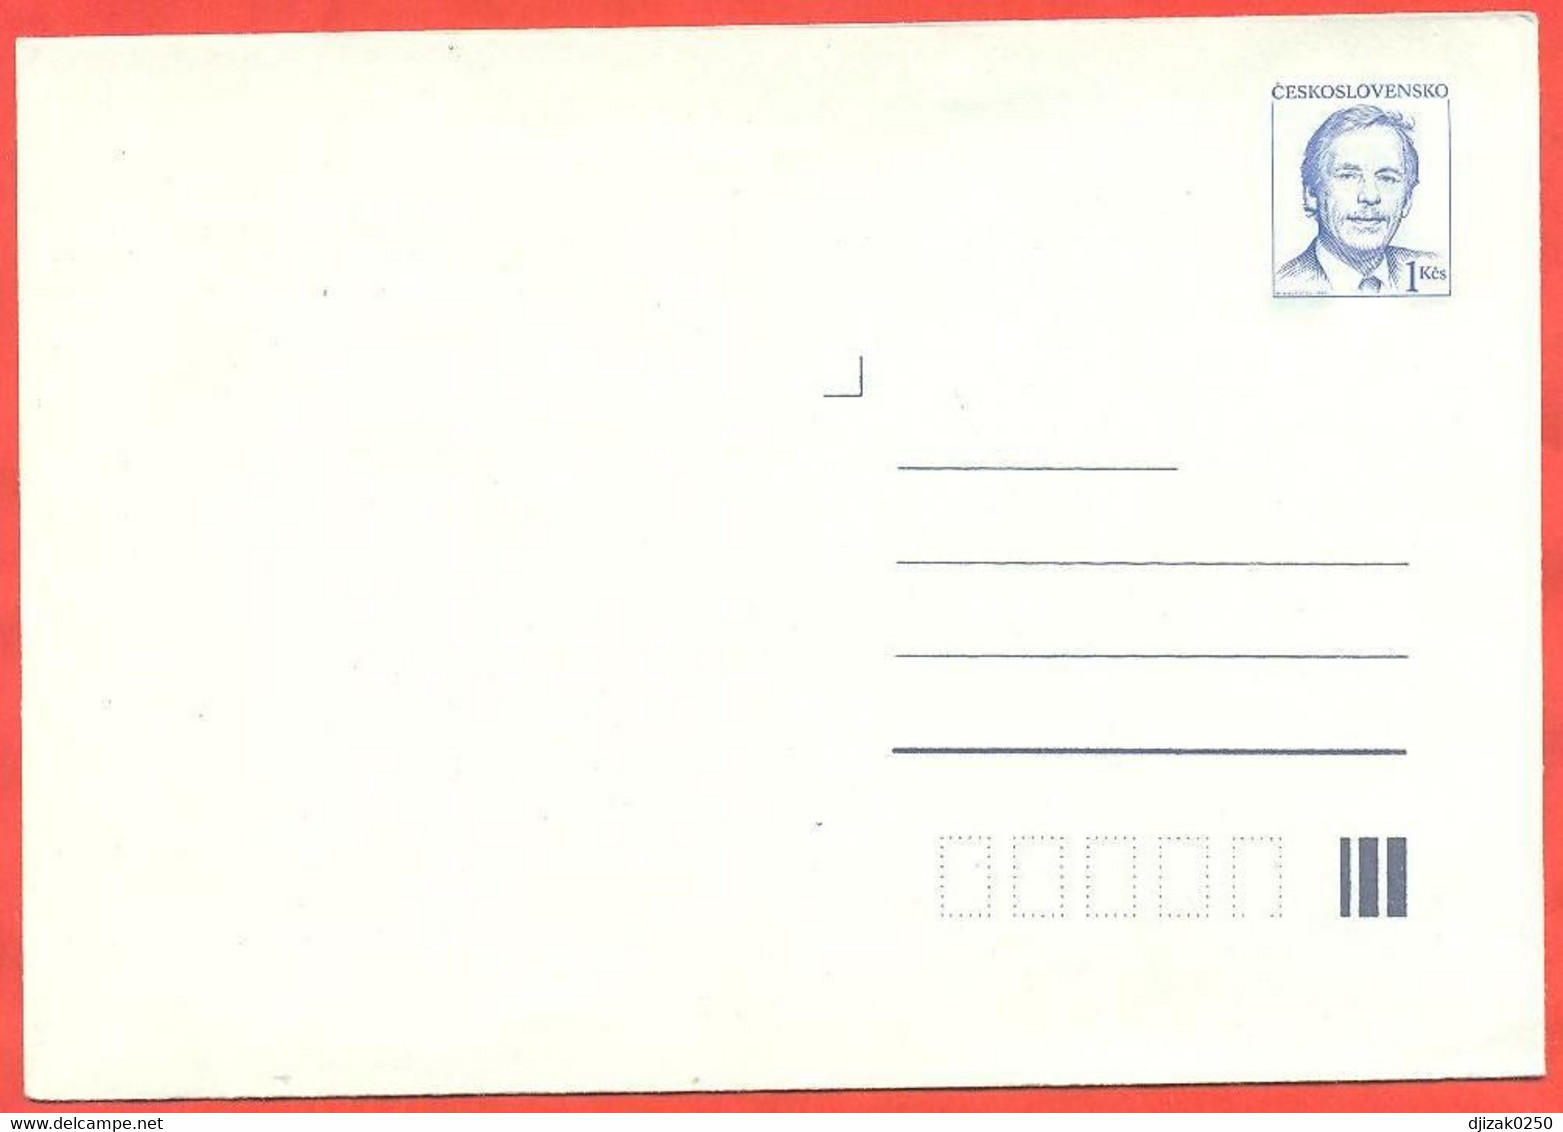 Czechoslovakia 1990. The Envelope With Printed Stamp. Unused. - Covers